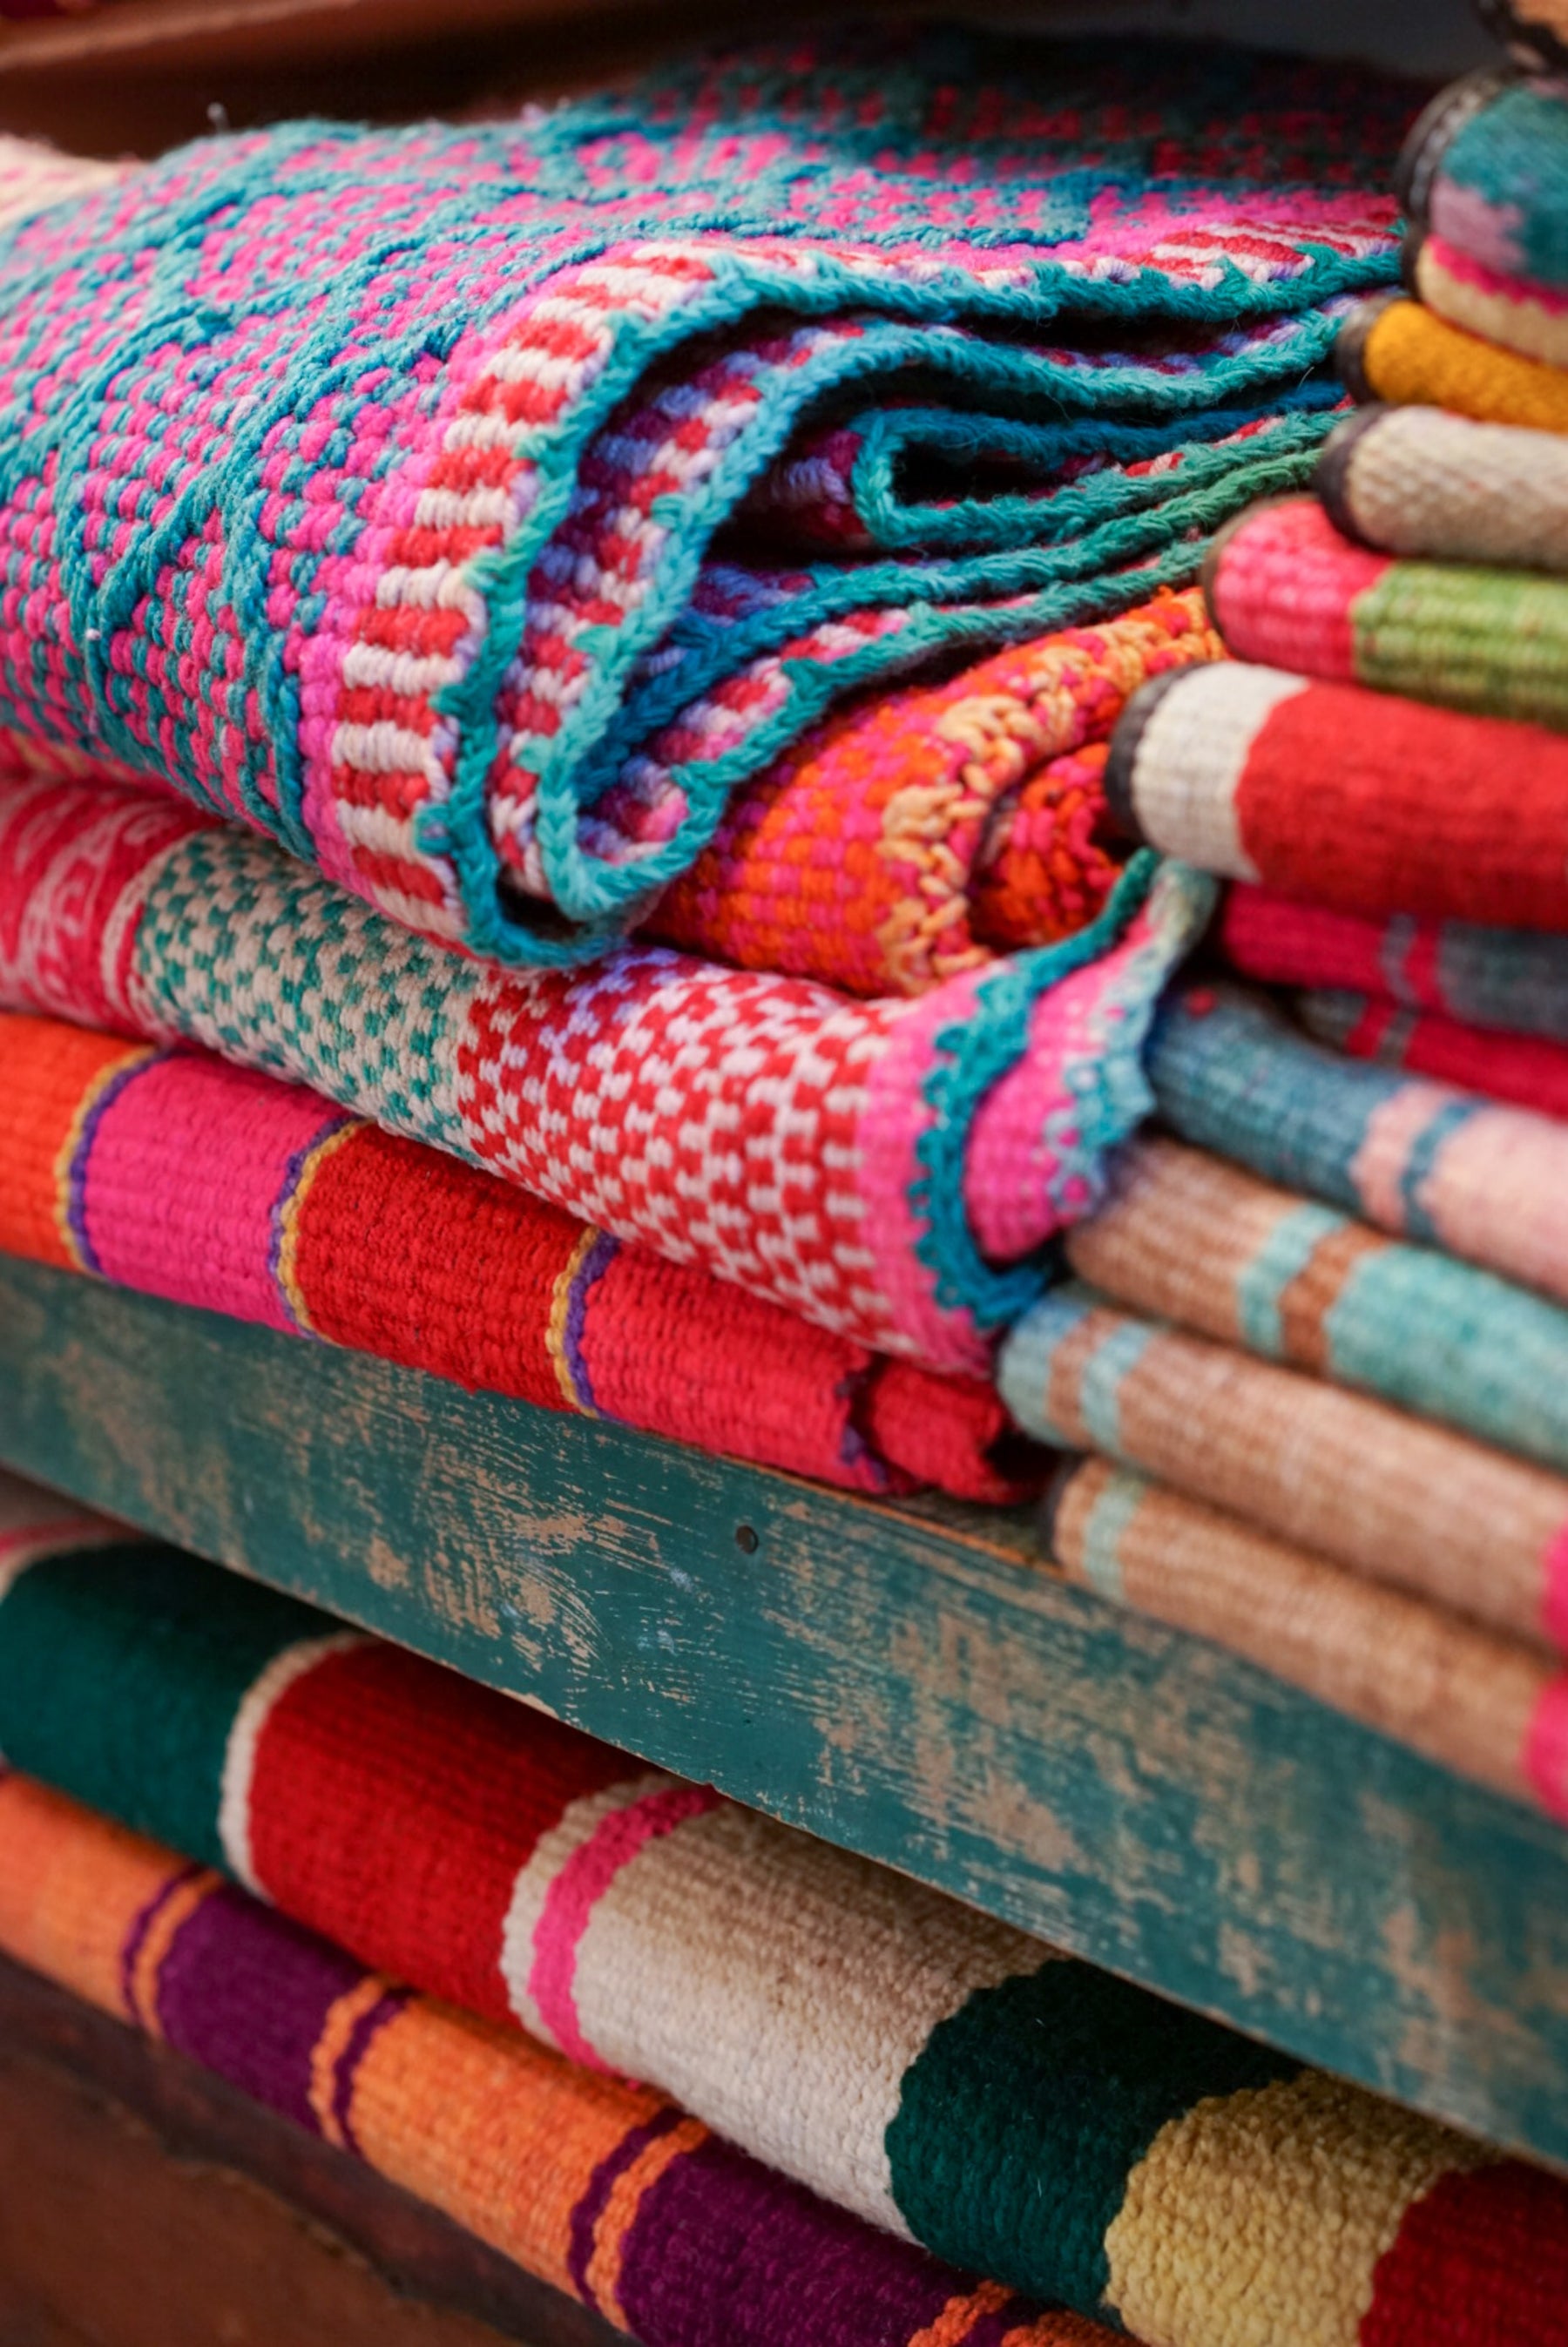 Part 2: Can I Put A Tribal Rug Into My Modern Home? #Lockdowndesigner